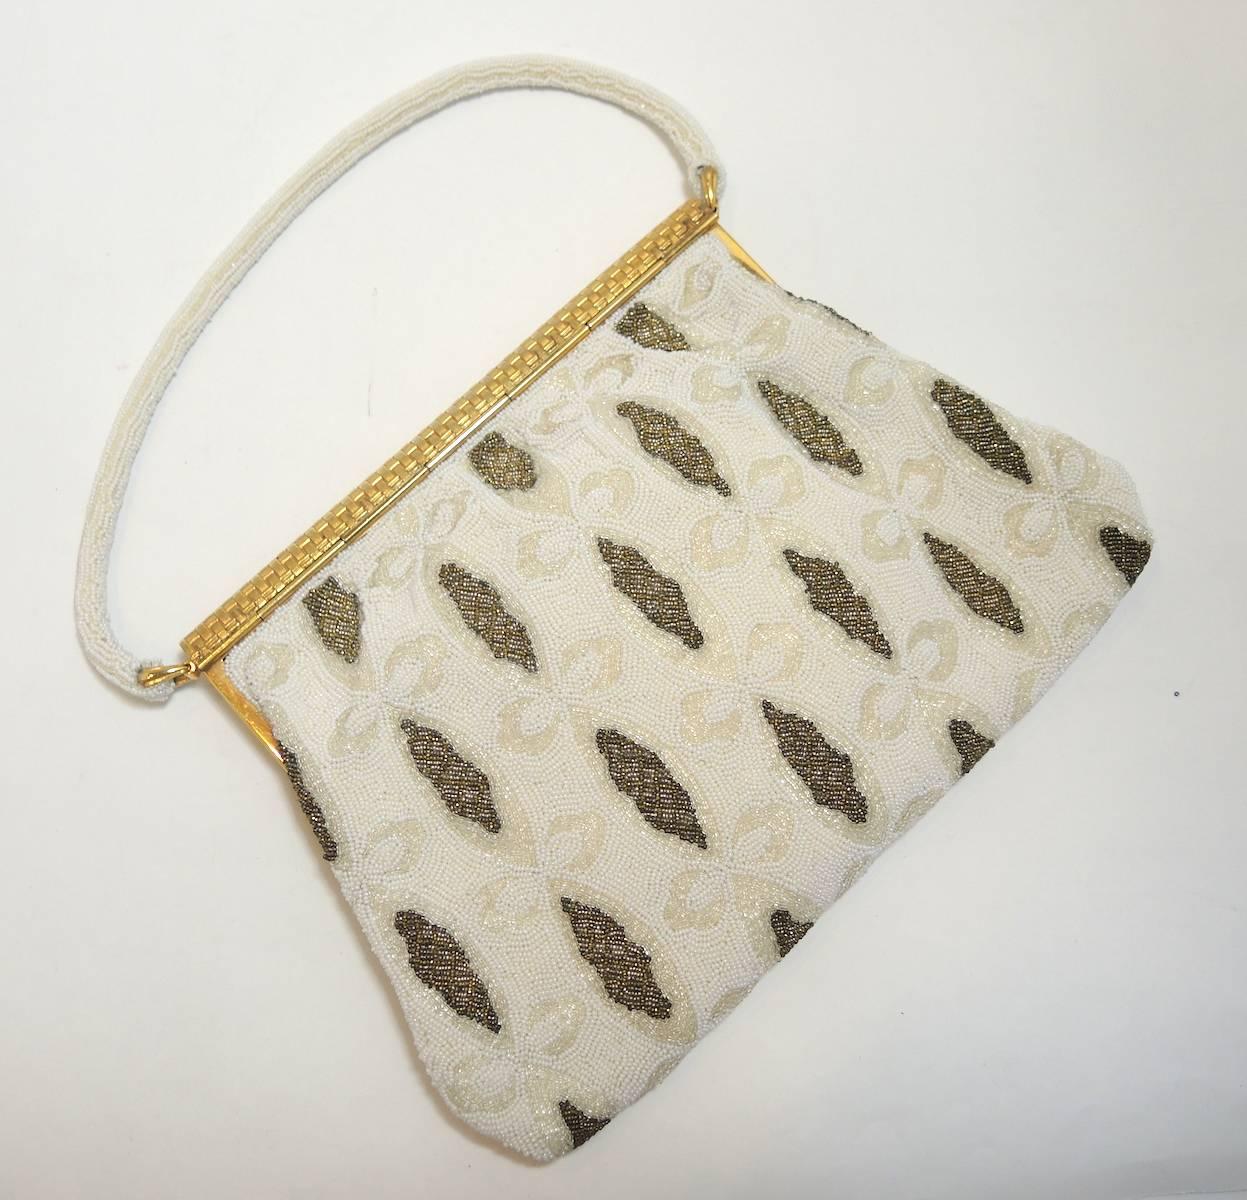 This stunning 1940s evening bag is in mint condition and is immaculately clean. Entire body is in white and gold small steel beads with a gold diamond shaped design on both sides. The gold tone flap has a basket weave design with rhinestones in the